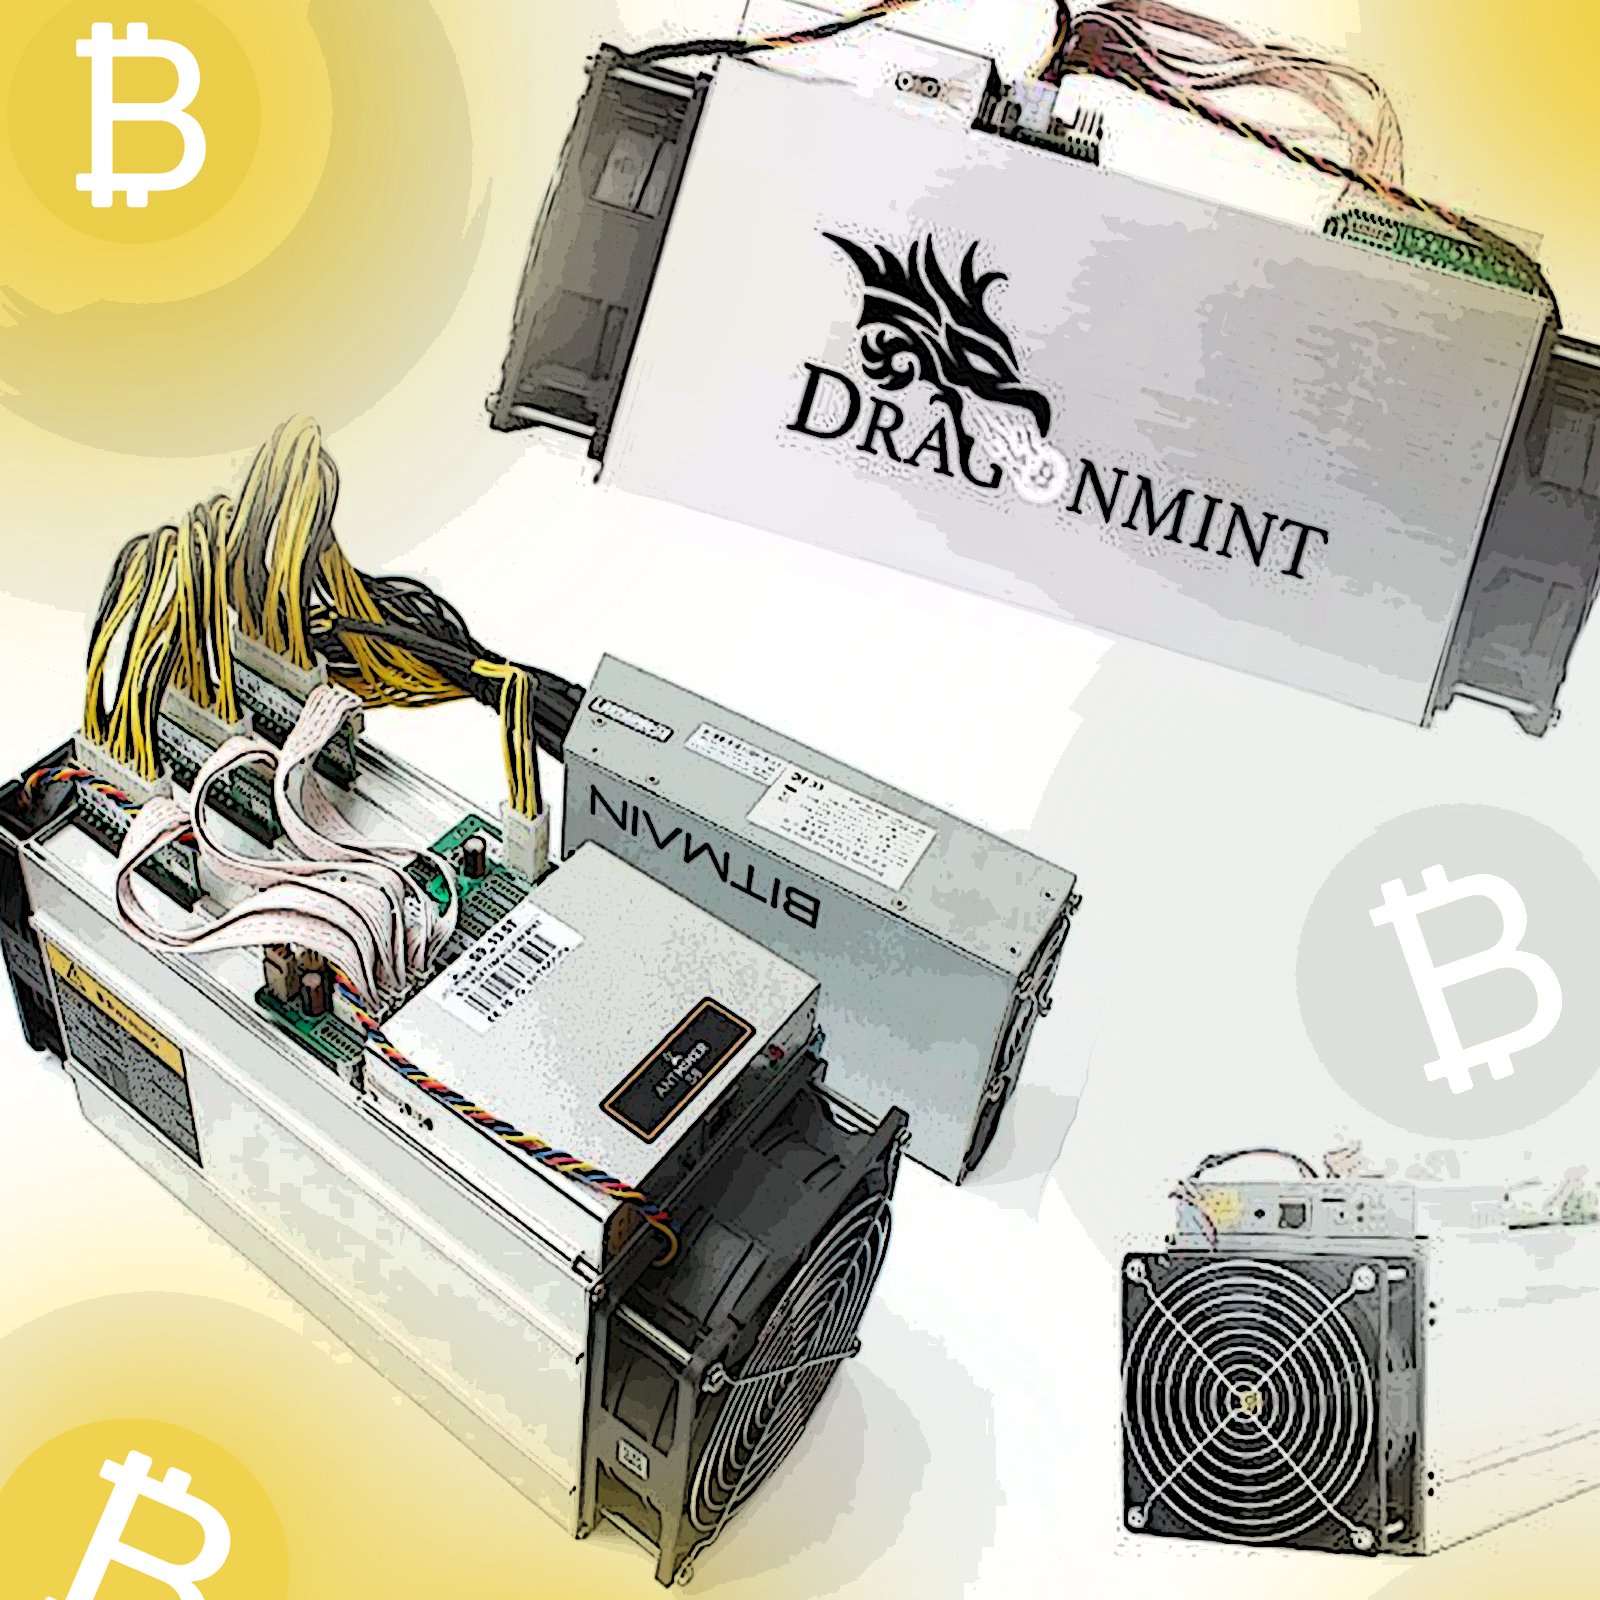 W/ PSU FREE SHIP Dragonmint T1 bitcoin virtual currency miner make some money 